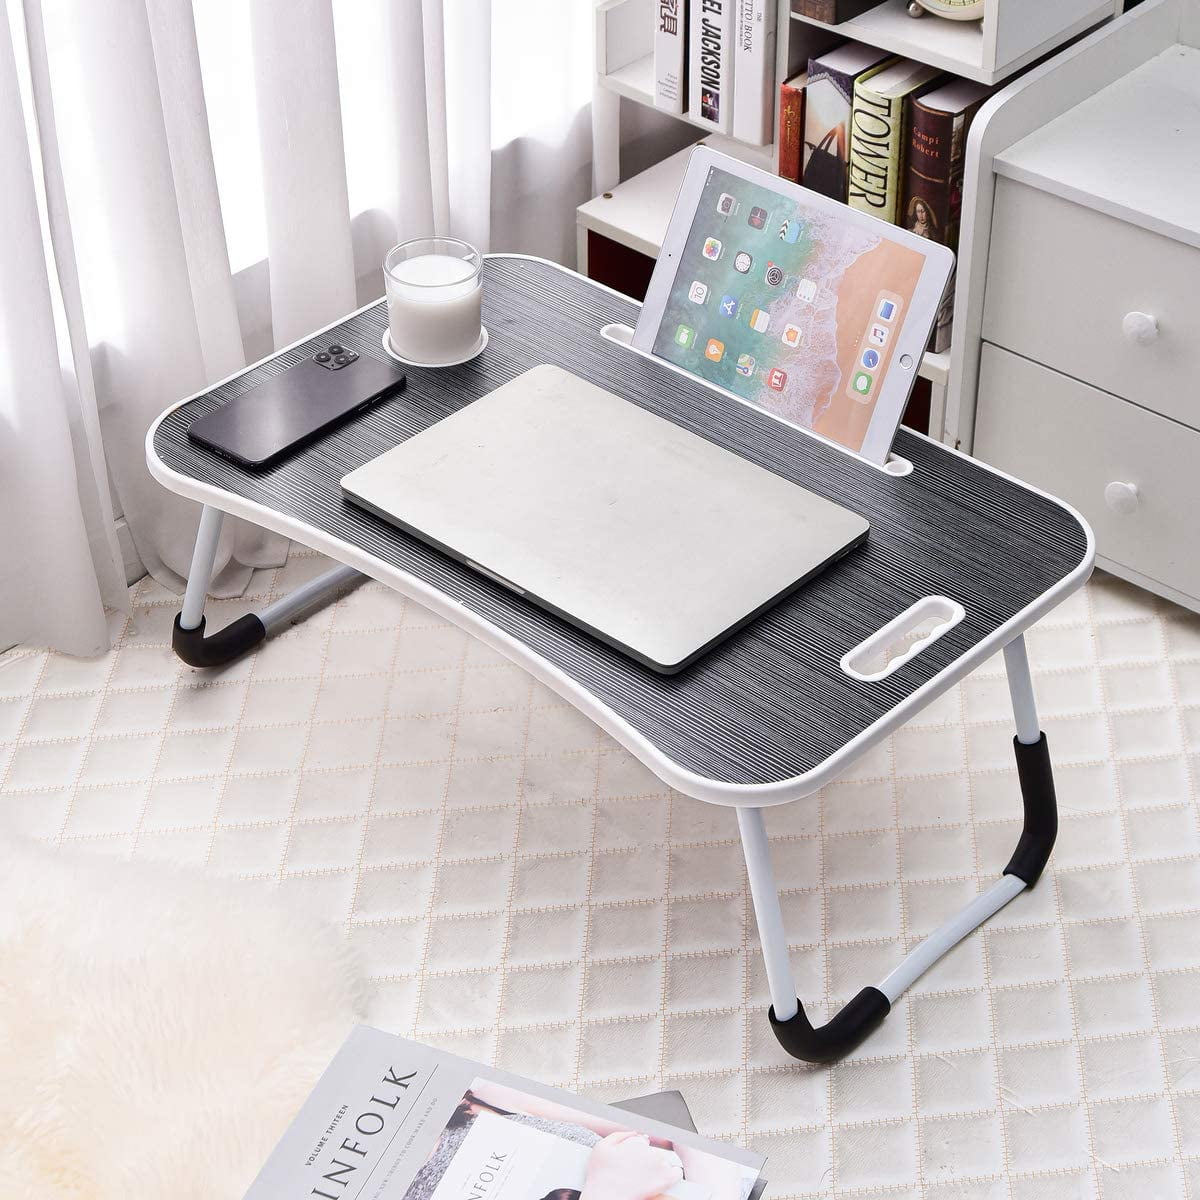 Foldable Small Wood Table Laptop Table Children Study Desk Dormitory Folding Notebook Table Lazy Portable Office Desk Reading Table On The Bed Color : Maple, Size : 60cm 